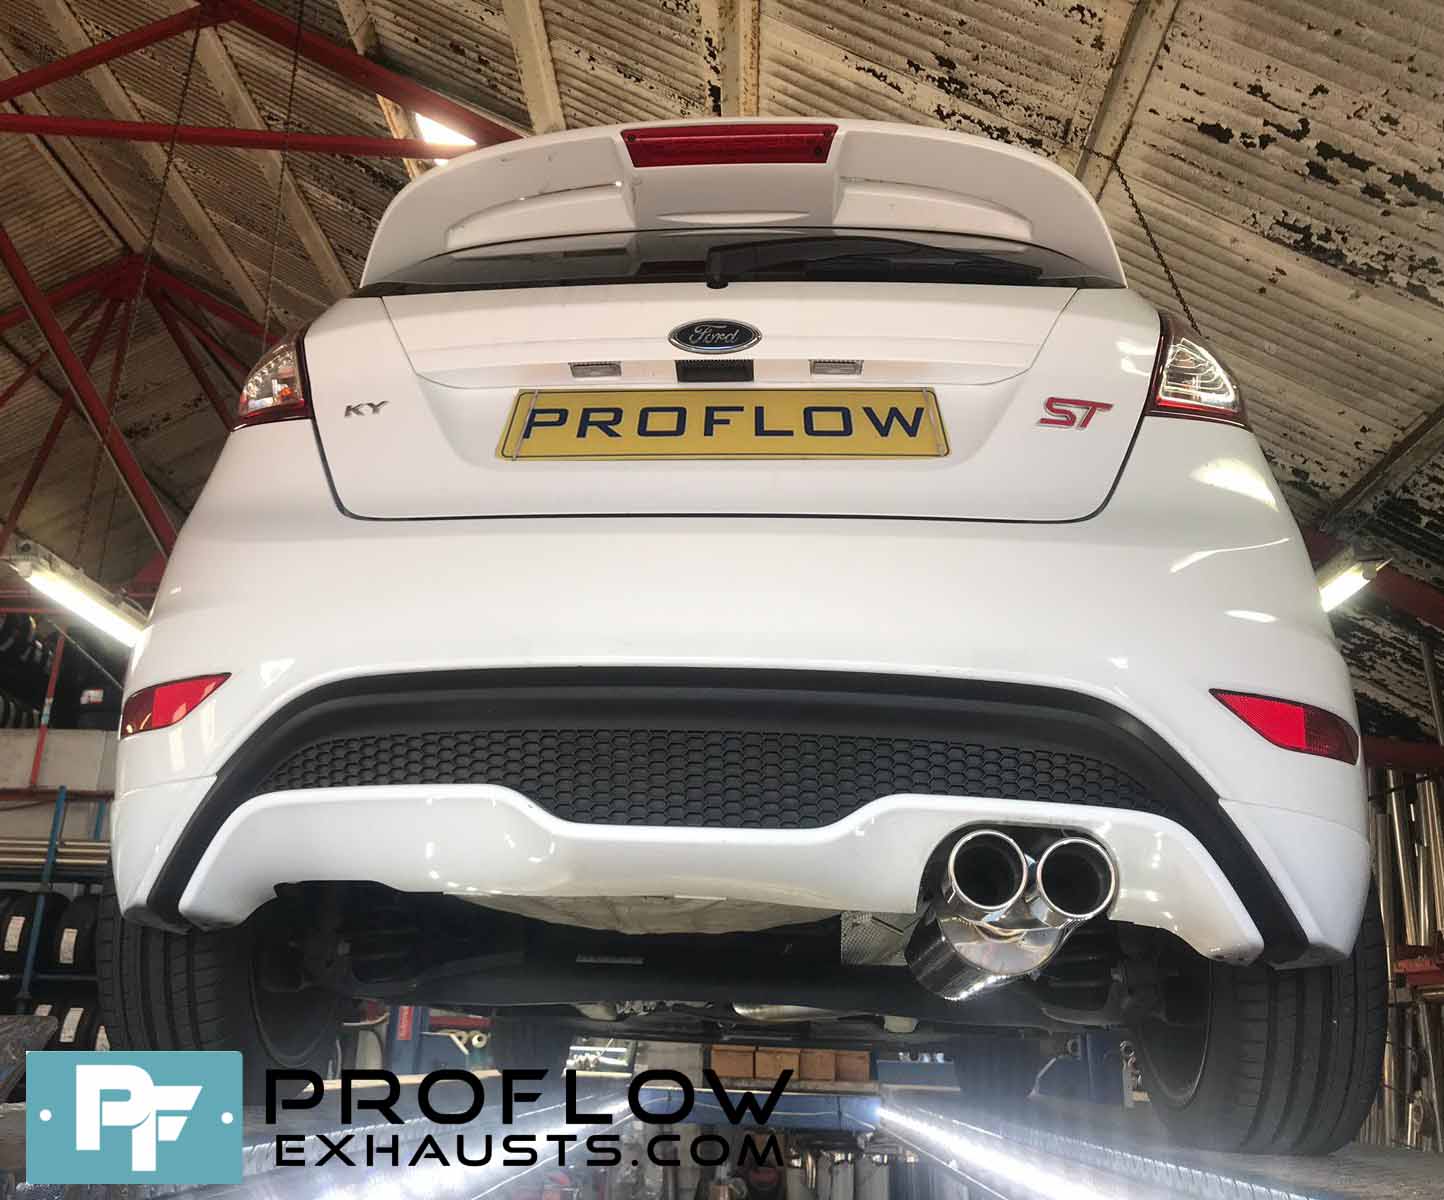 Proflow Custom Built Exhaust Ford Fiesta ST Stainless Steel Exhaust Middle And Rear With Tx023 Tailpipe (2)